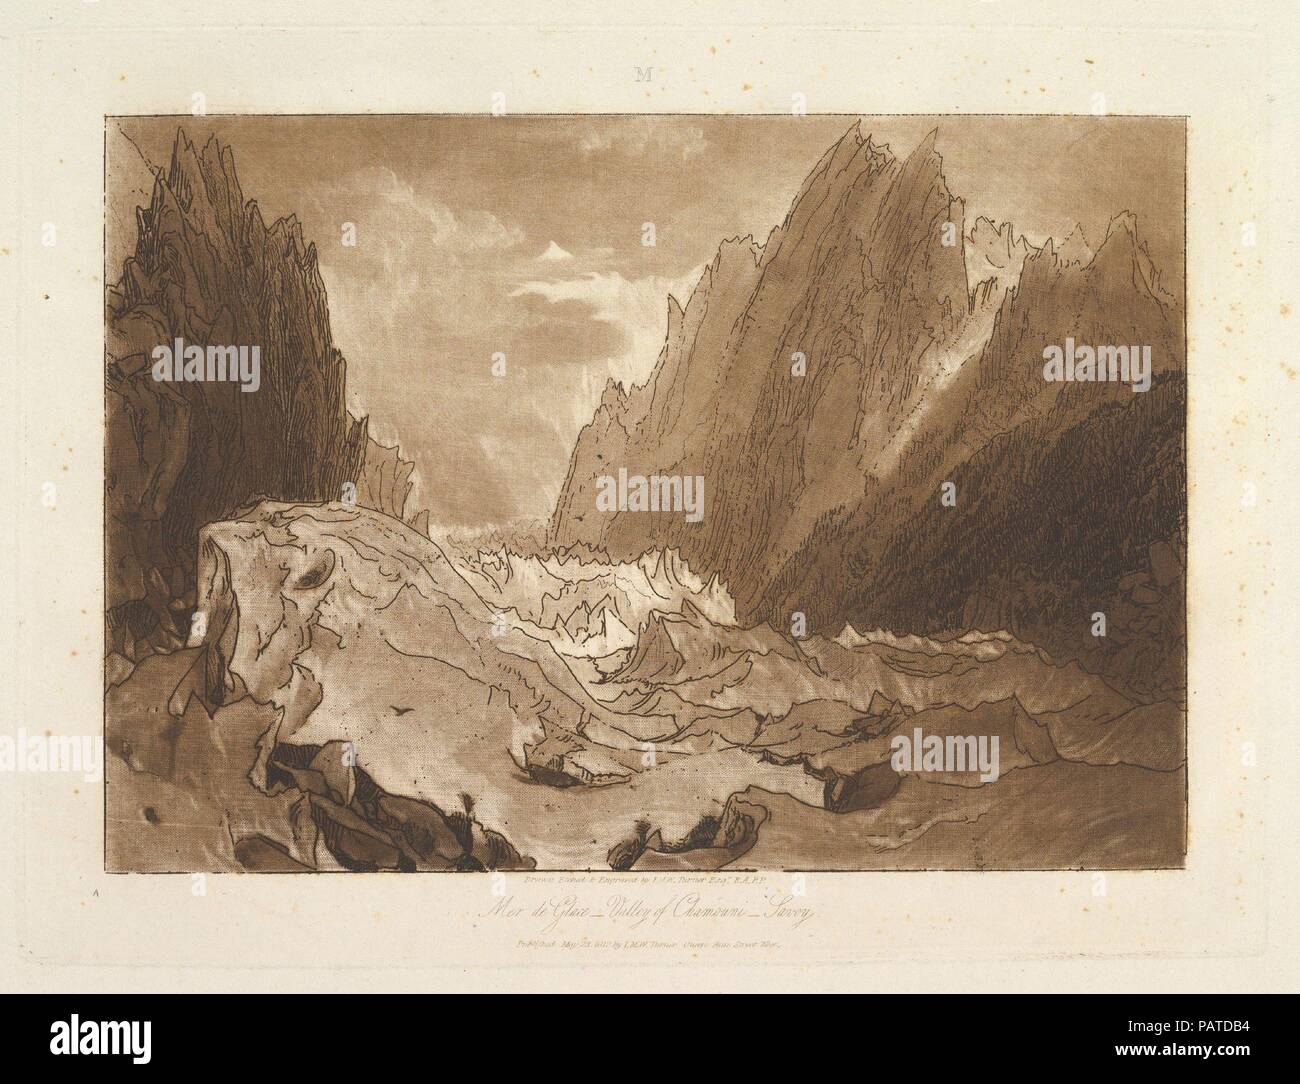 Mêr de Glace, Valley of Chamouni-Savoy (Liber Studiorum, part X, plate 50). Artist and publisher: Joseph Mallord William Turner (British, London 1775-1851 London). Dimensions: plate: 7 x 10 in. (17.8 x 25.4 cm)  sheet: 8 9/16 x 11 5/8 in. (21.7 x 29.5 cm). Date: May 23, 1812.  Turner distilled his ideas about landscape In 'Liber Studiorum' (Latin for Book of Studies), a series of seventy prints plus a frontispiece published between 1807 and 1819. To establish the compositions, he made brown watercolor drawings, then etched outlines onto copper plates. This is one of the few instances where Tur Stock Photo